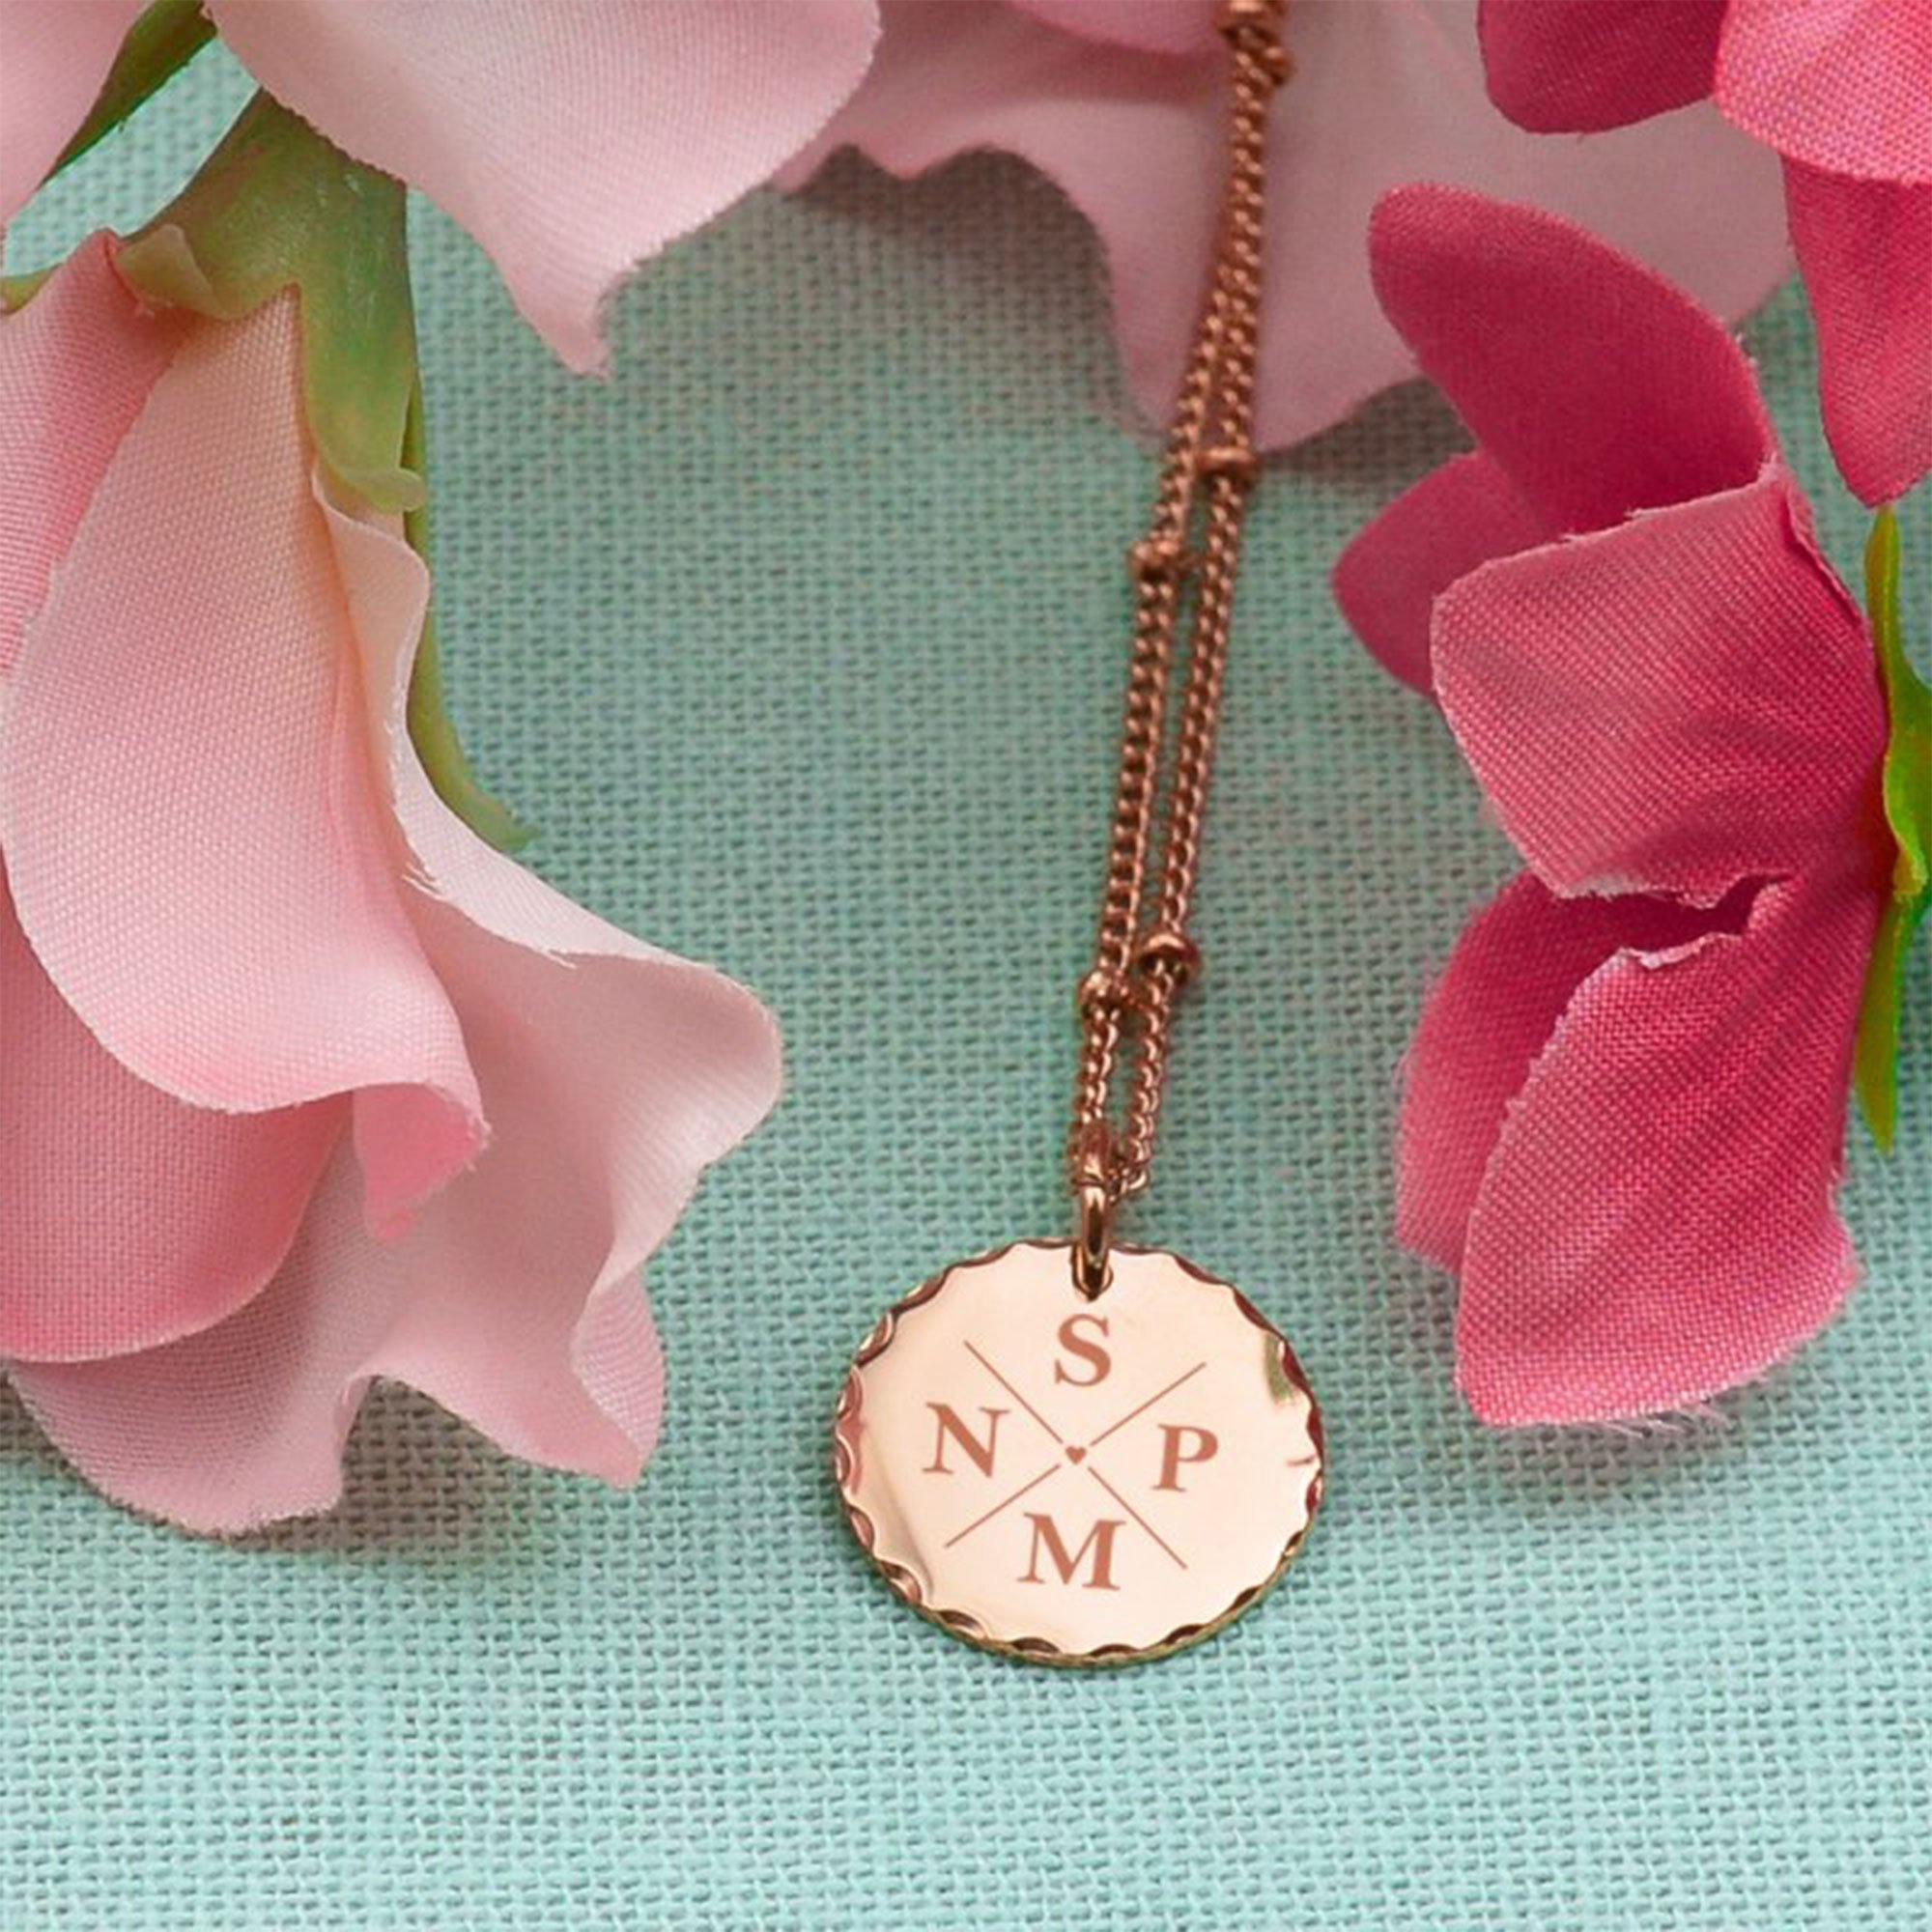 Necklace with name engraved in rose gold on a mint background with pink flowers